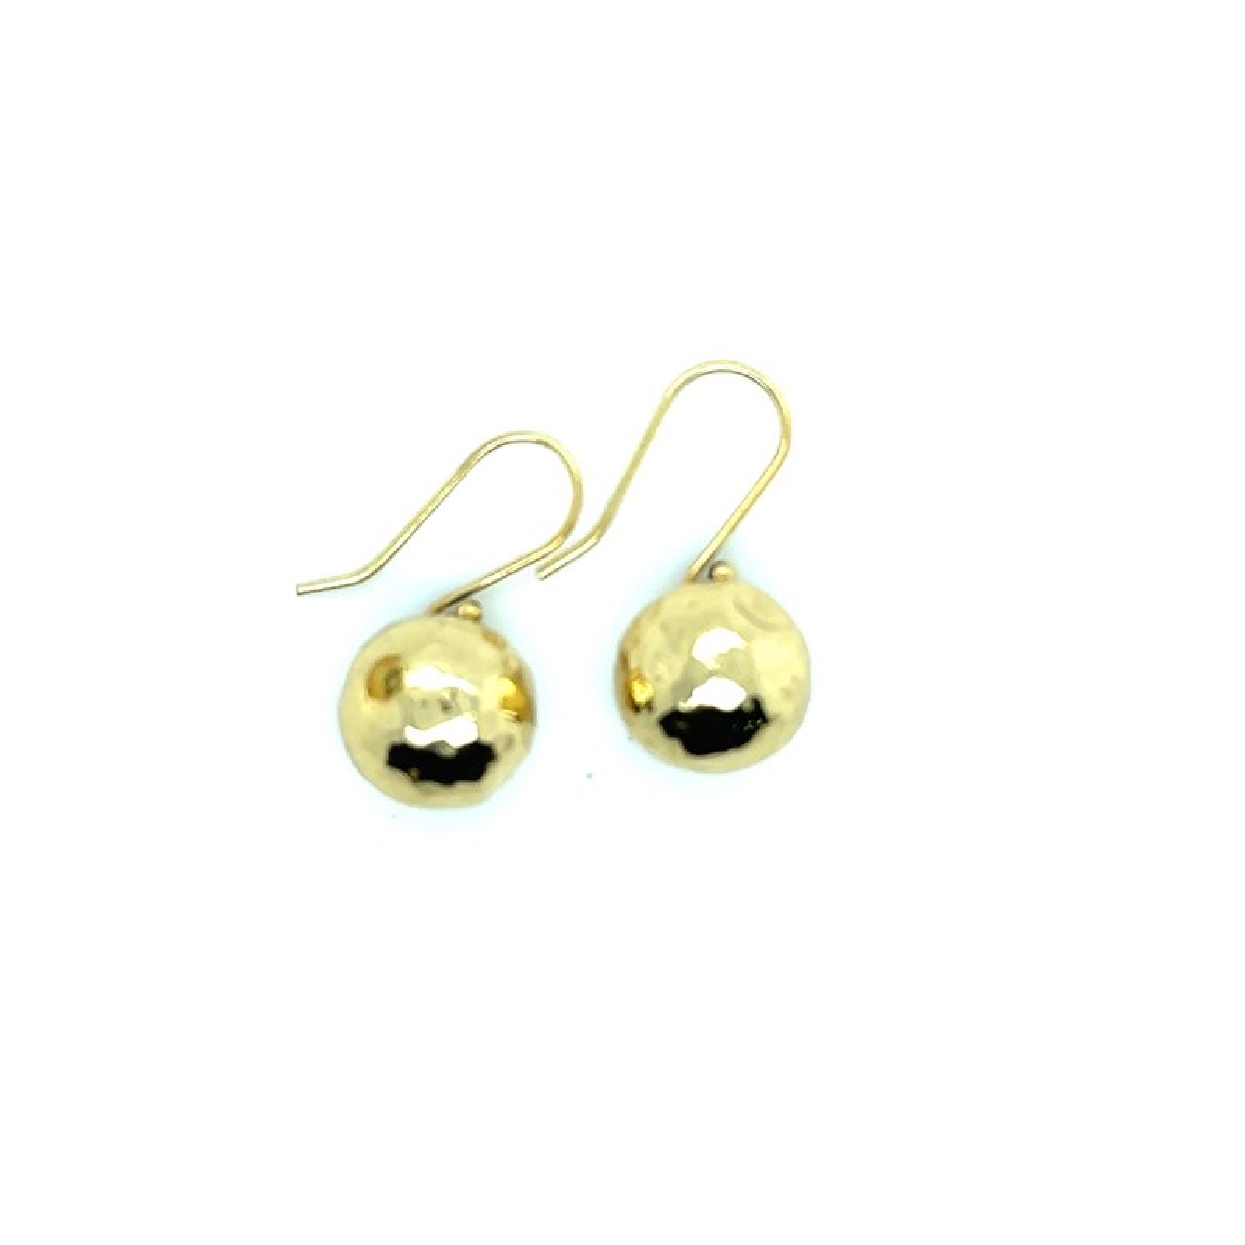 18K Yellow Gold Hollow Texturized Ball Shaped Earrings 